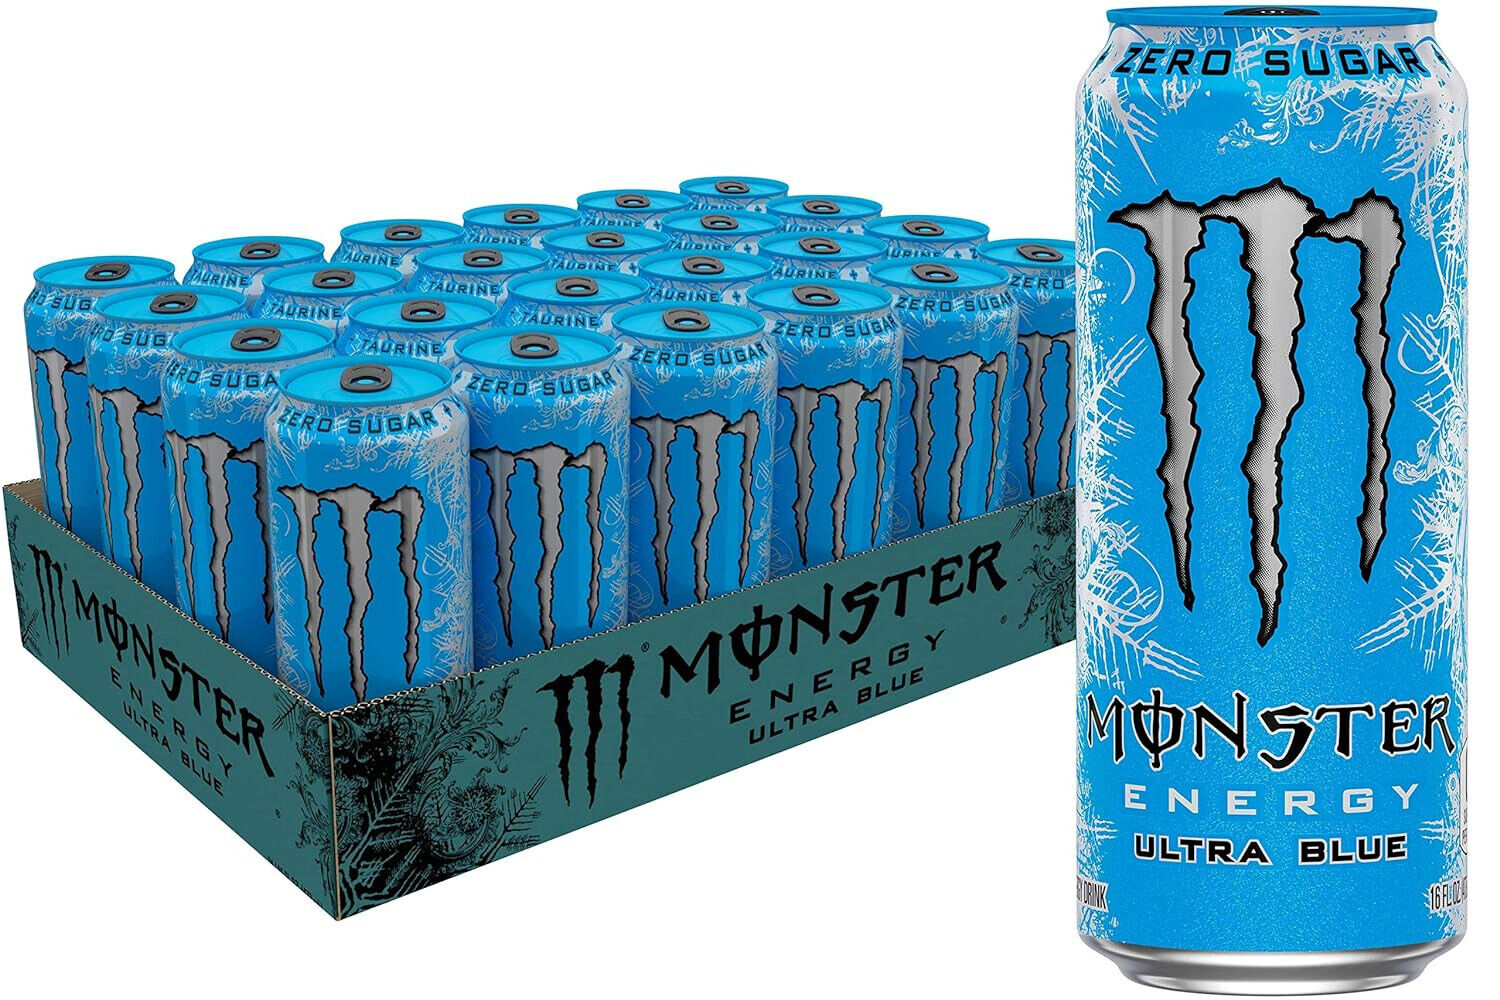 Monster Energy Ultra Blue, Sugar Free Energy Drink, 16 Ounce (Pack of 24)